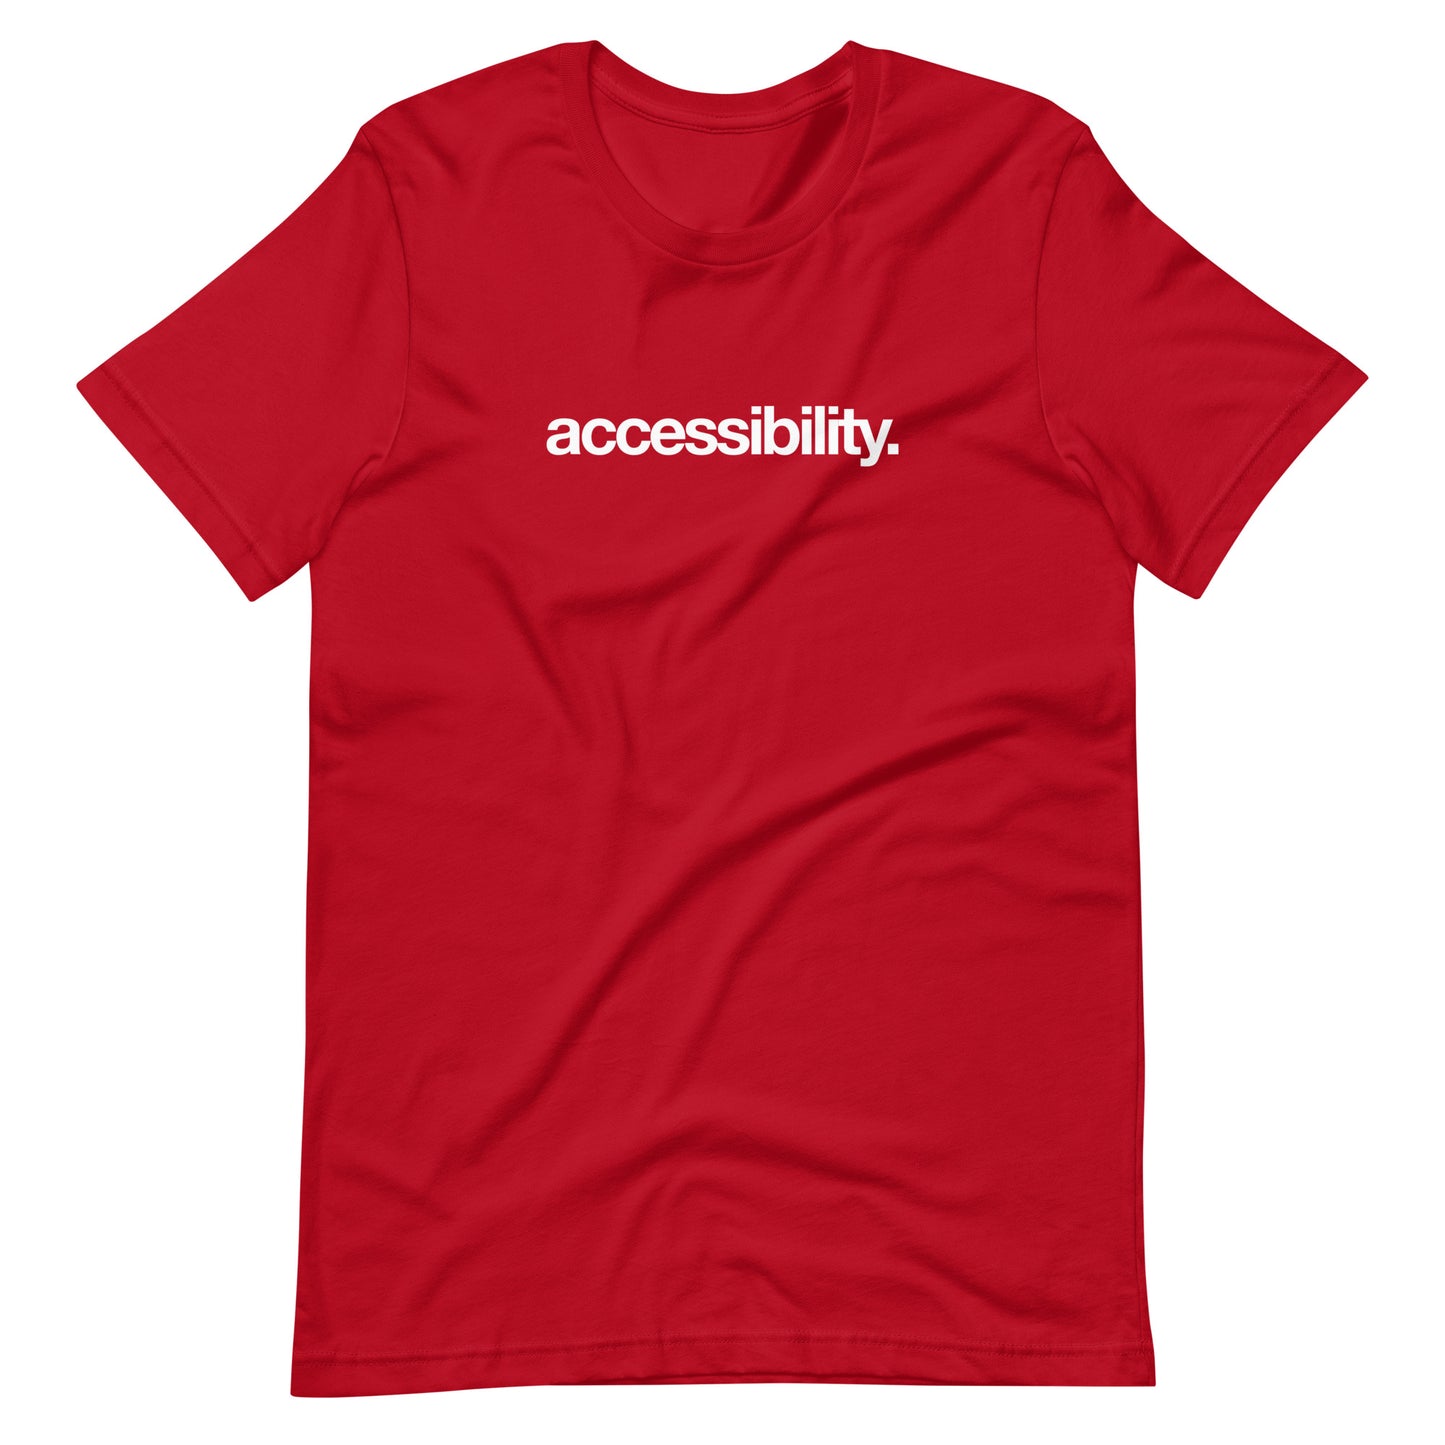 White, accessibility, word with period in Helvetica Neue font, center aligned, on front of red t-shirt.